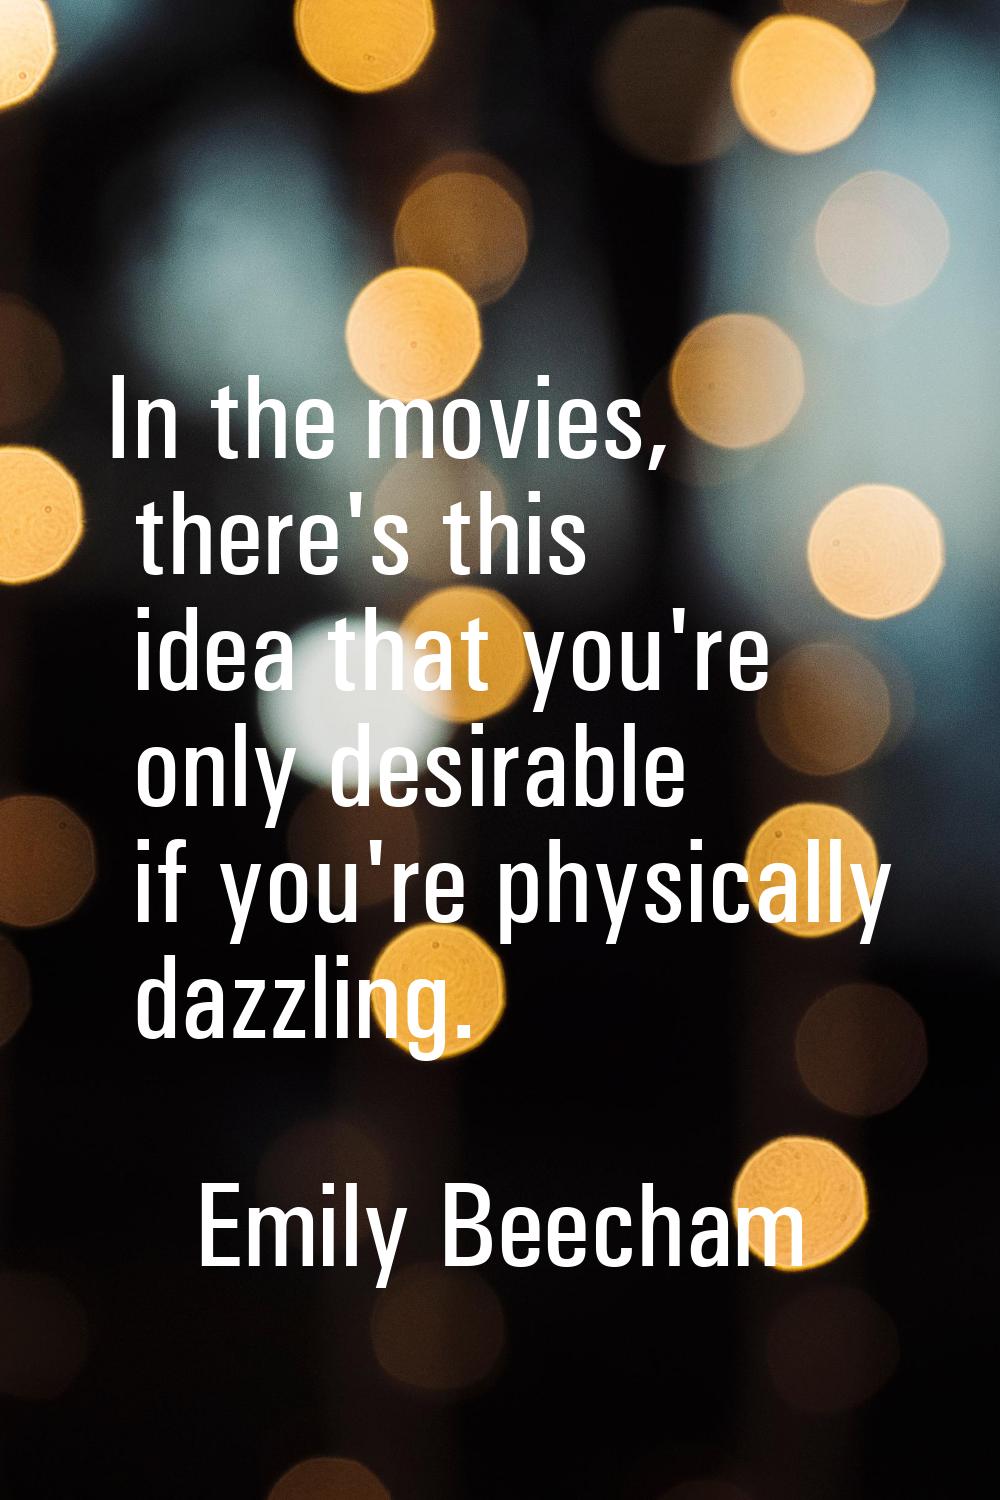 In the movies, there's this idea that you're only desirable if you're physically dazzling.